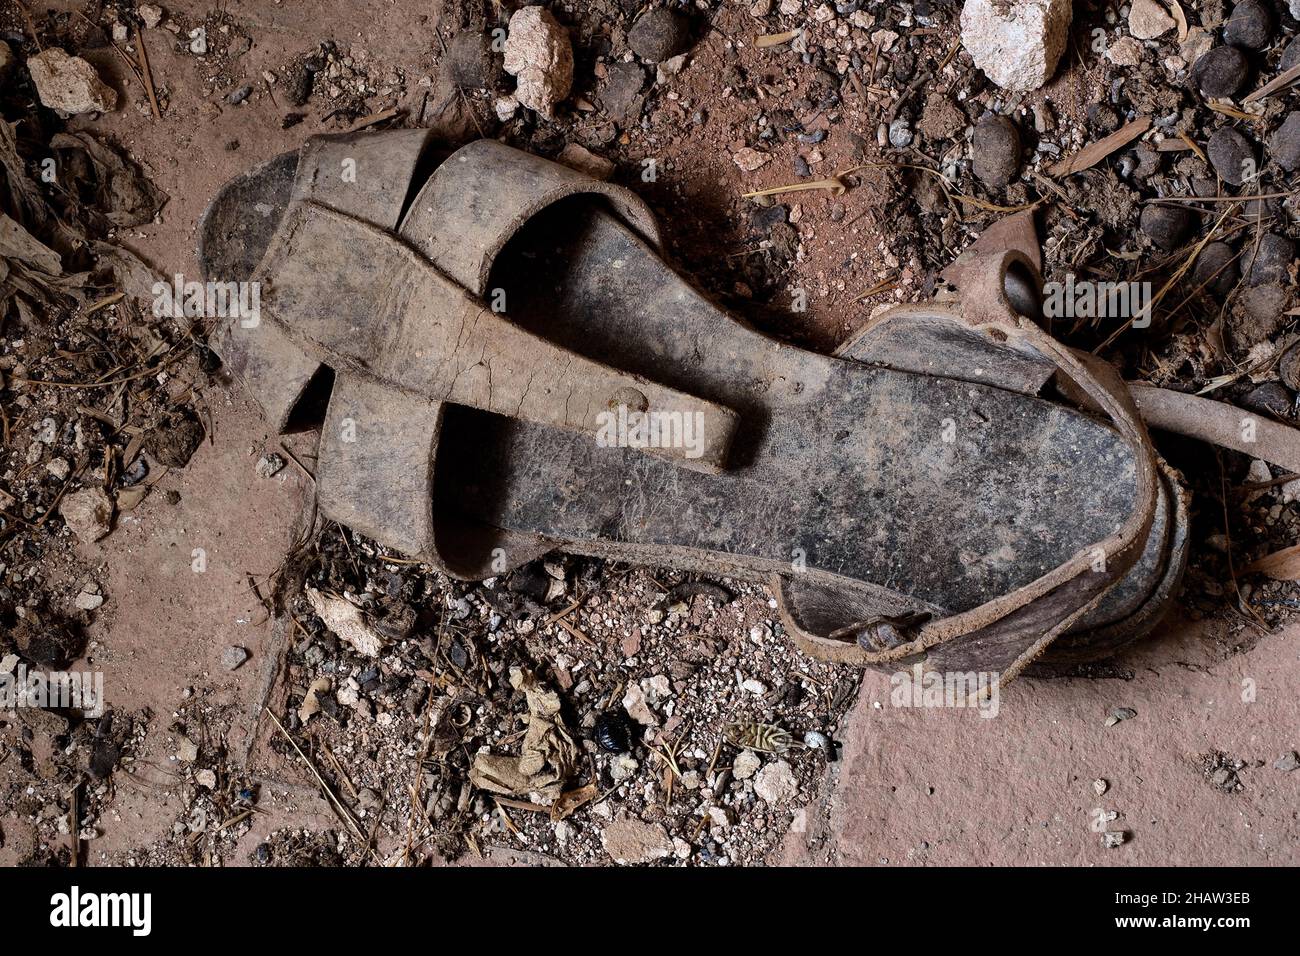 Traditional Spanish sandal for farm workers, from above, sturdy leather sandal of the campesinos, Andalusia, Spain Stock Photo